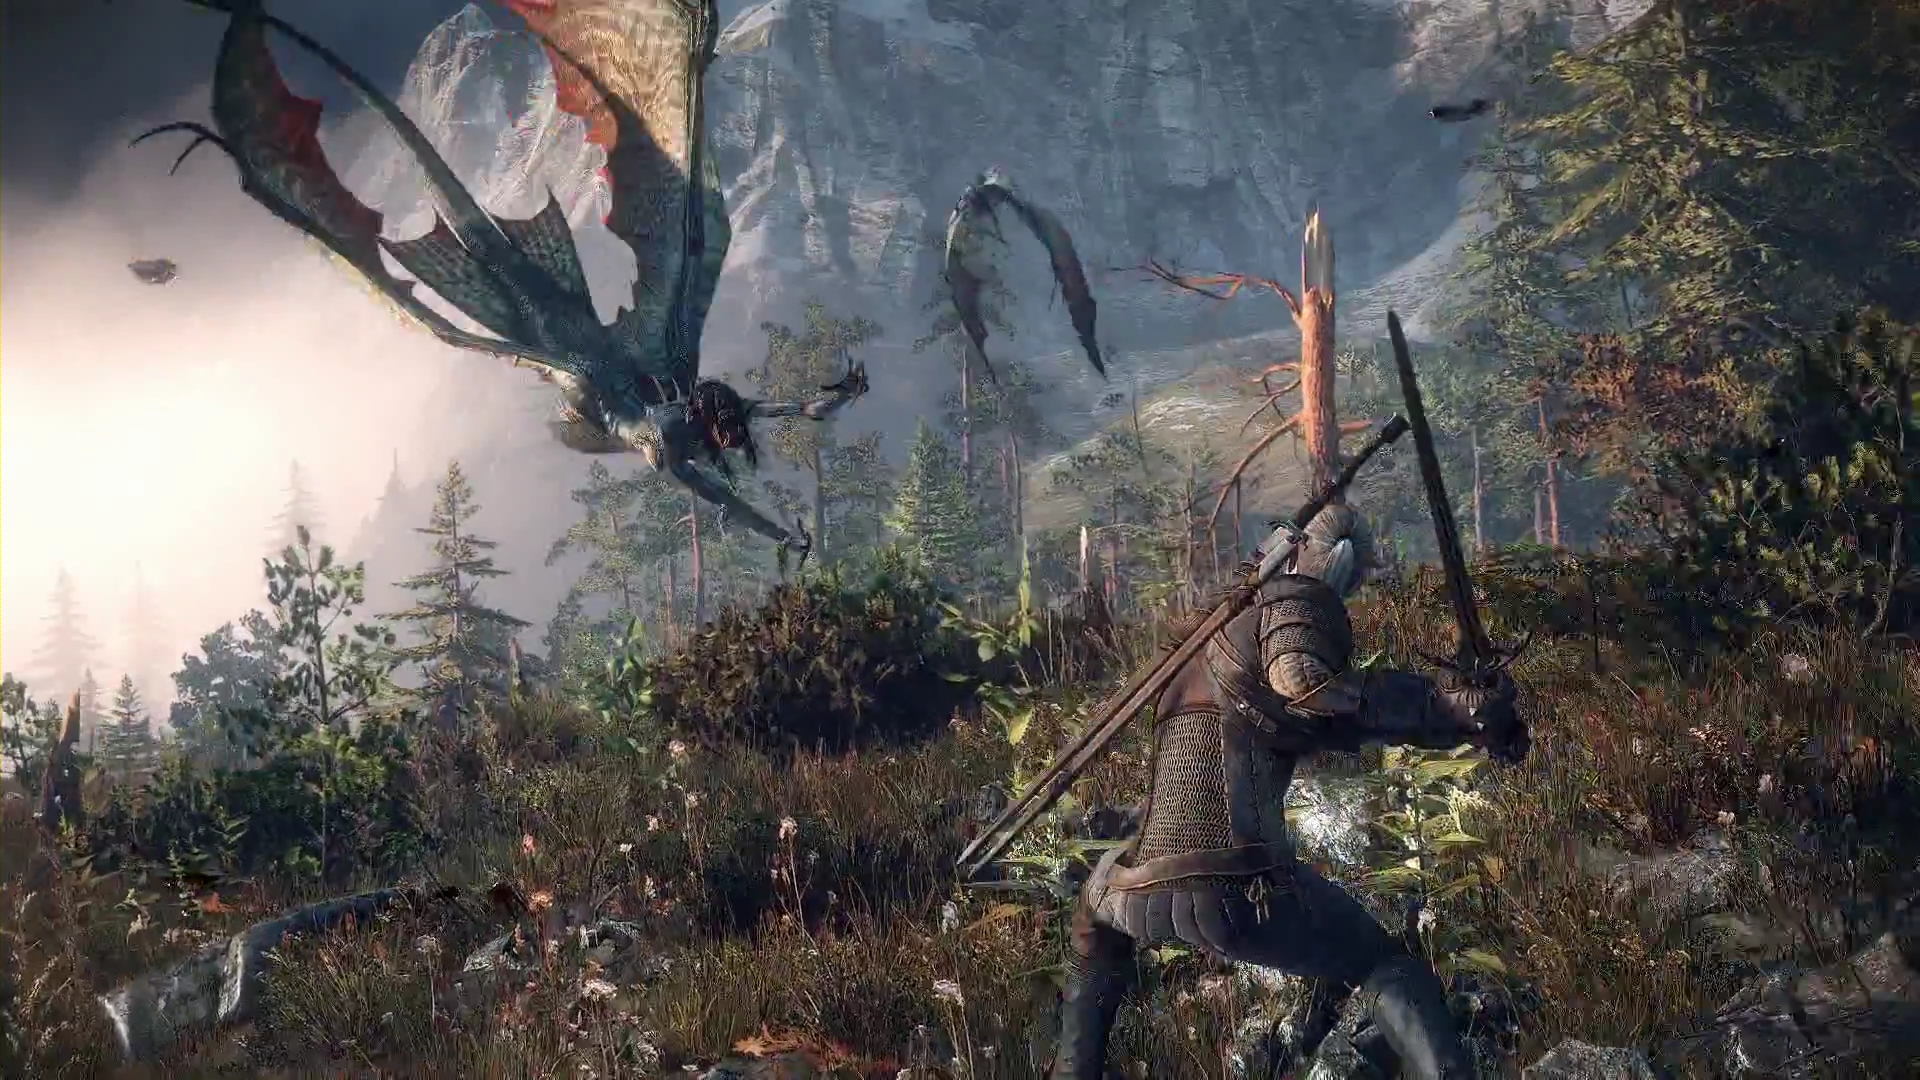 The Collection Witcher Video Game Wild Hunt